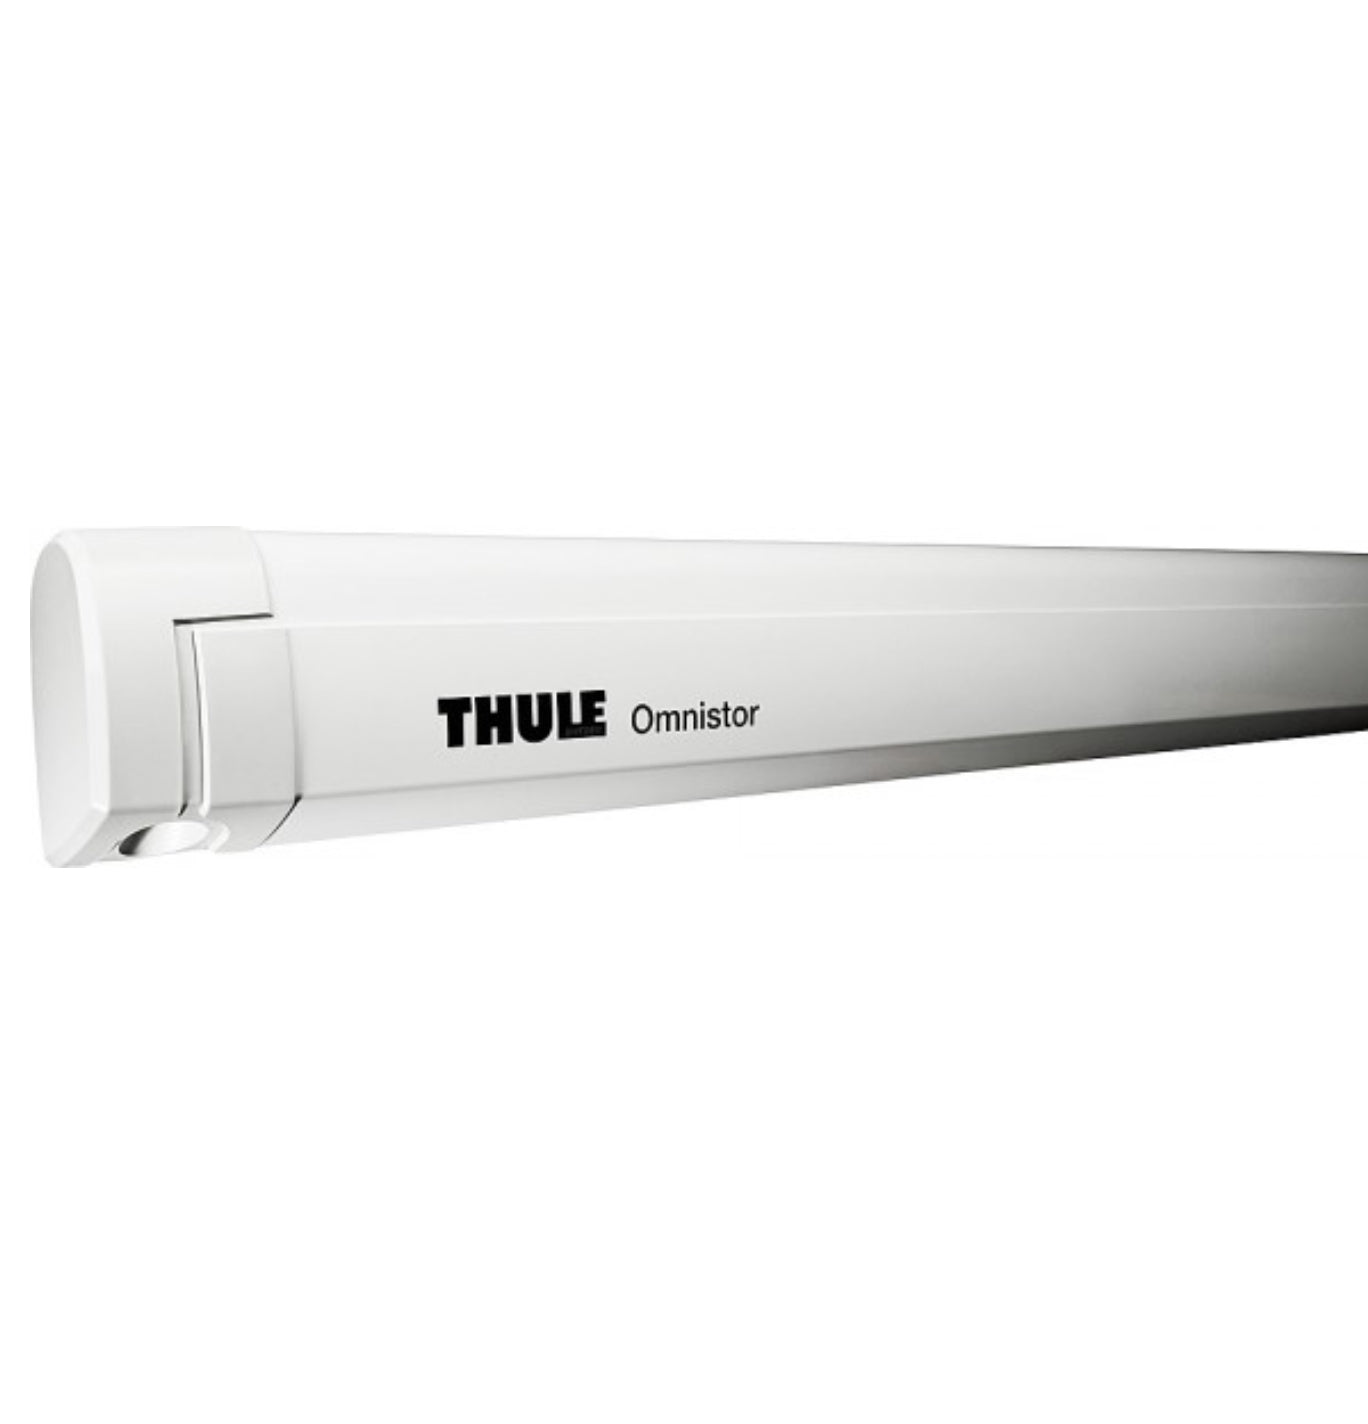 Thule Omnistor 5200 | 4.02m White | Wall Mounted Awning | 301053 Image